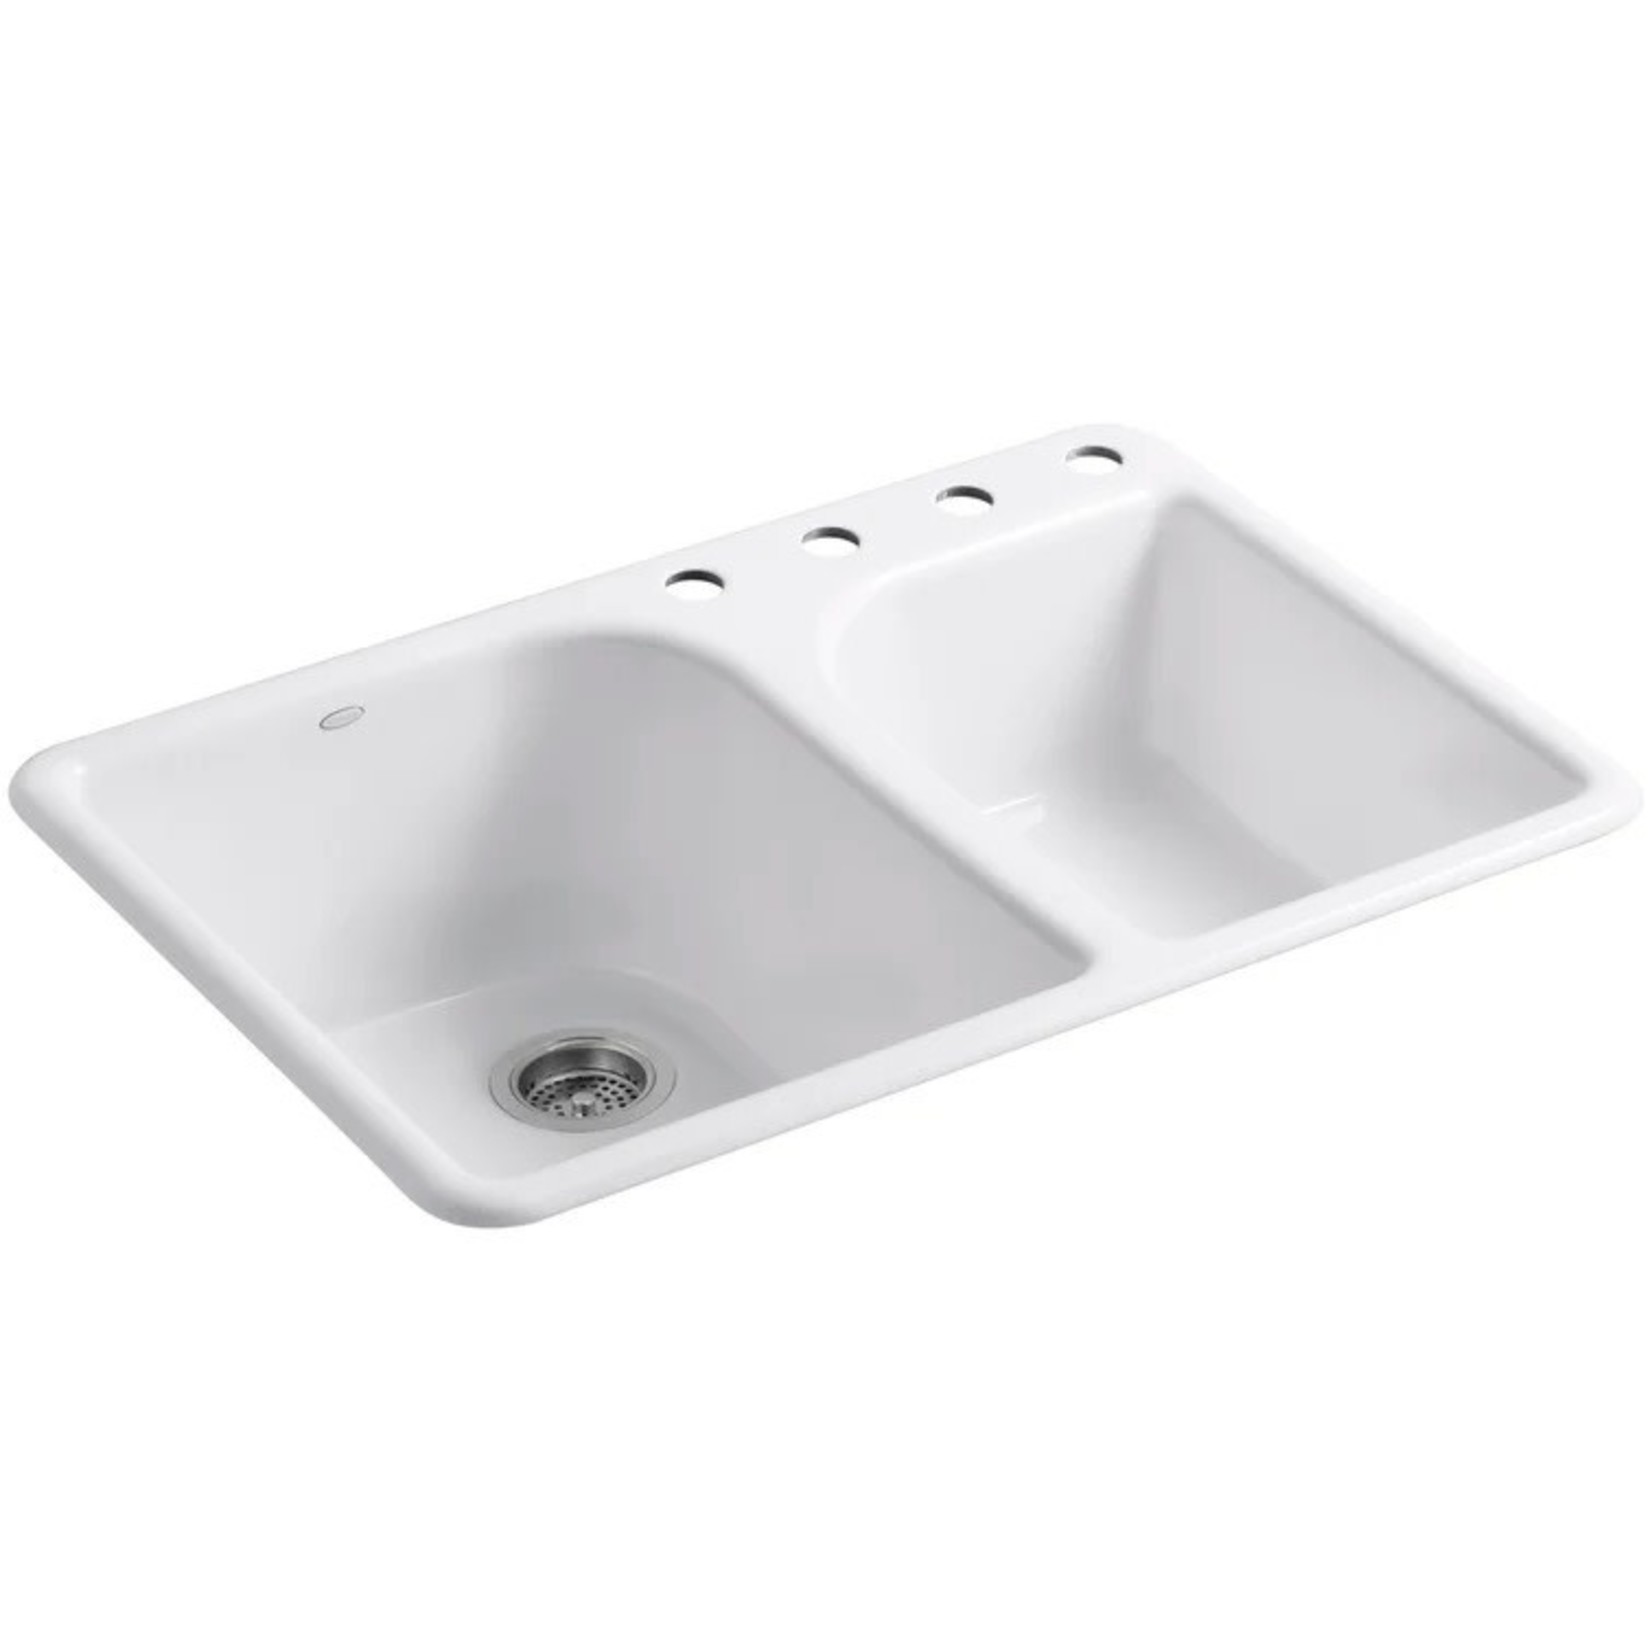 *Turnings 33" L x 22" W Drop-In Kitchen Sink with 4 Faucet Holes - Sink Only